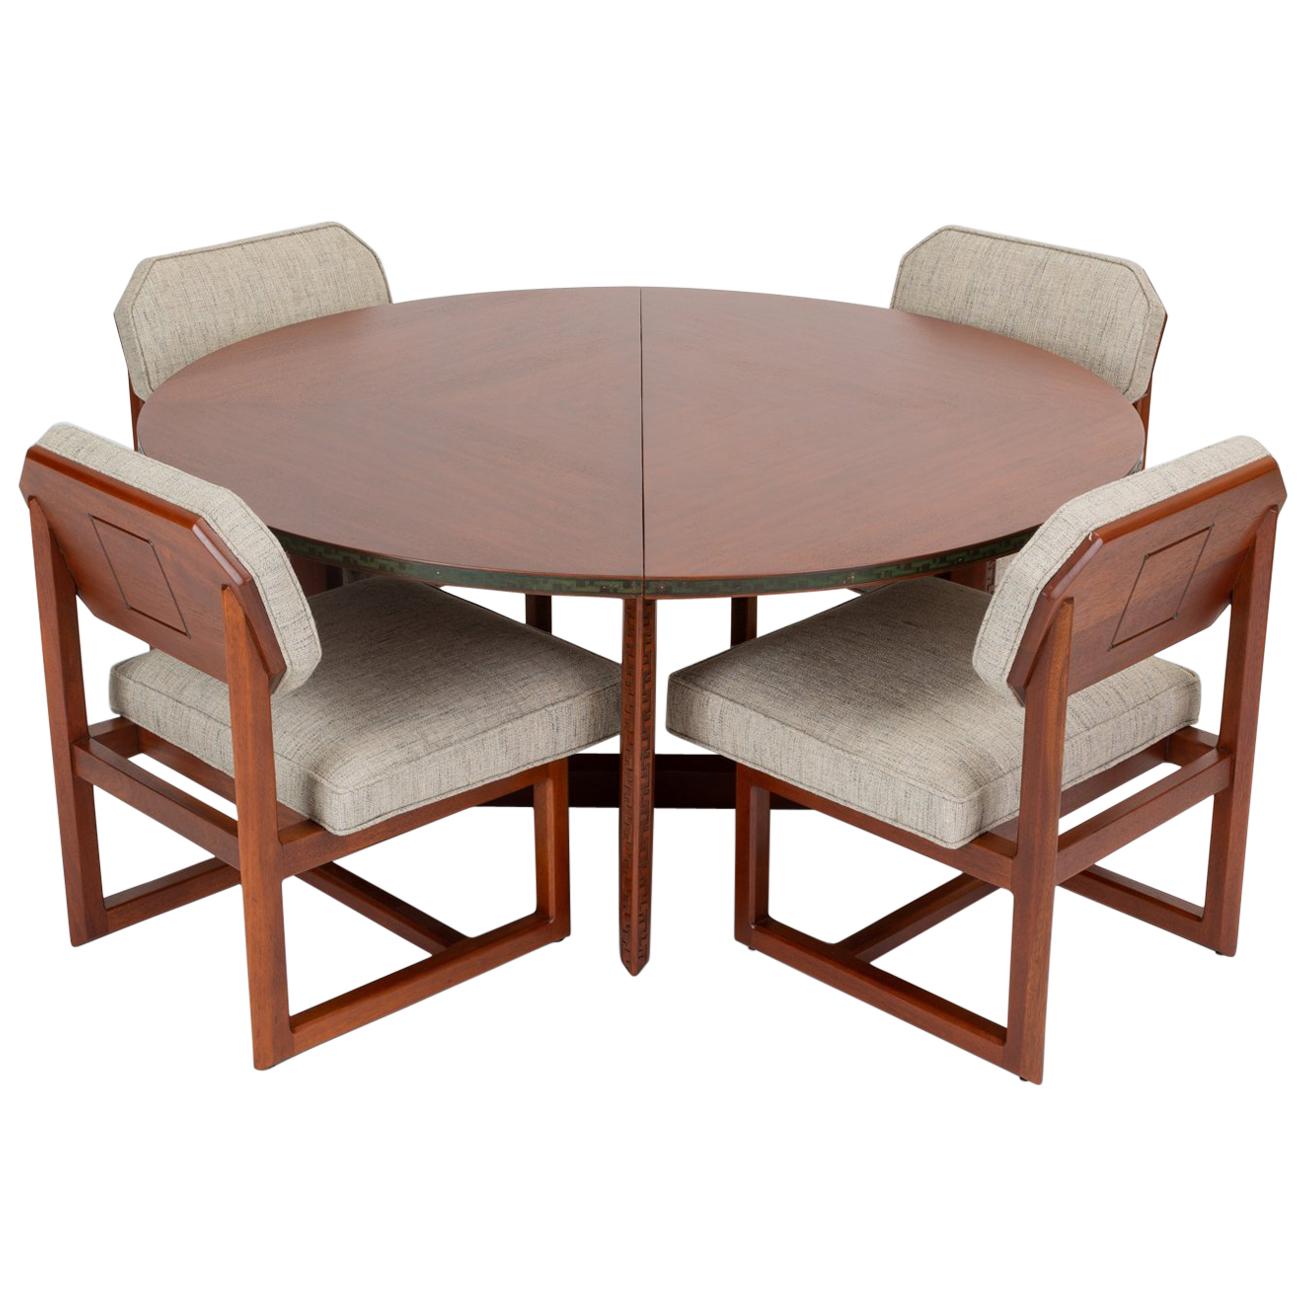 Frank Lloyd Wright “Taliesin” Game Table with Four Chairs